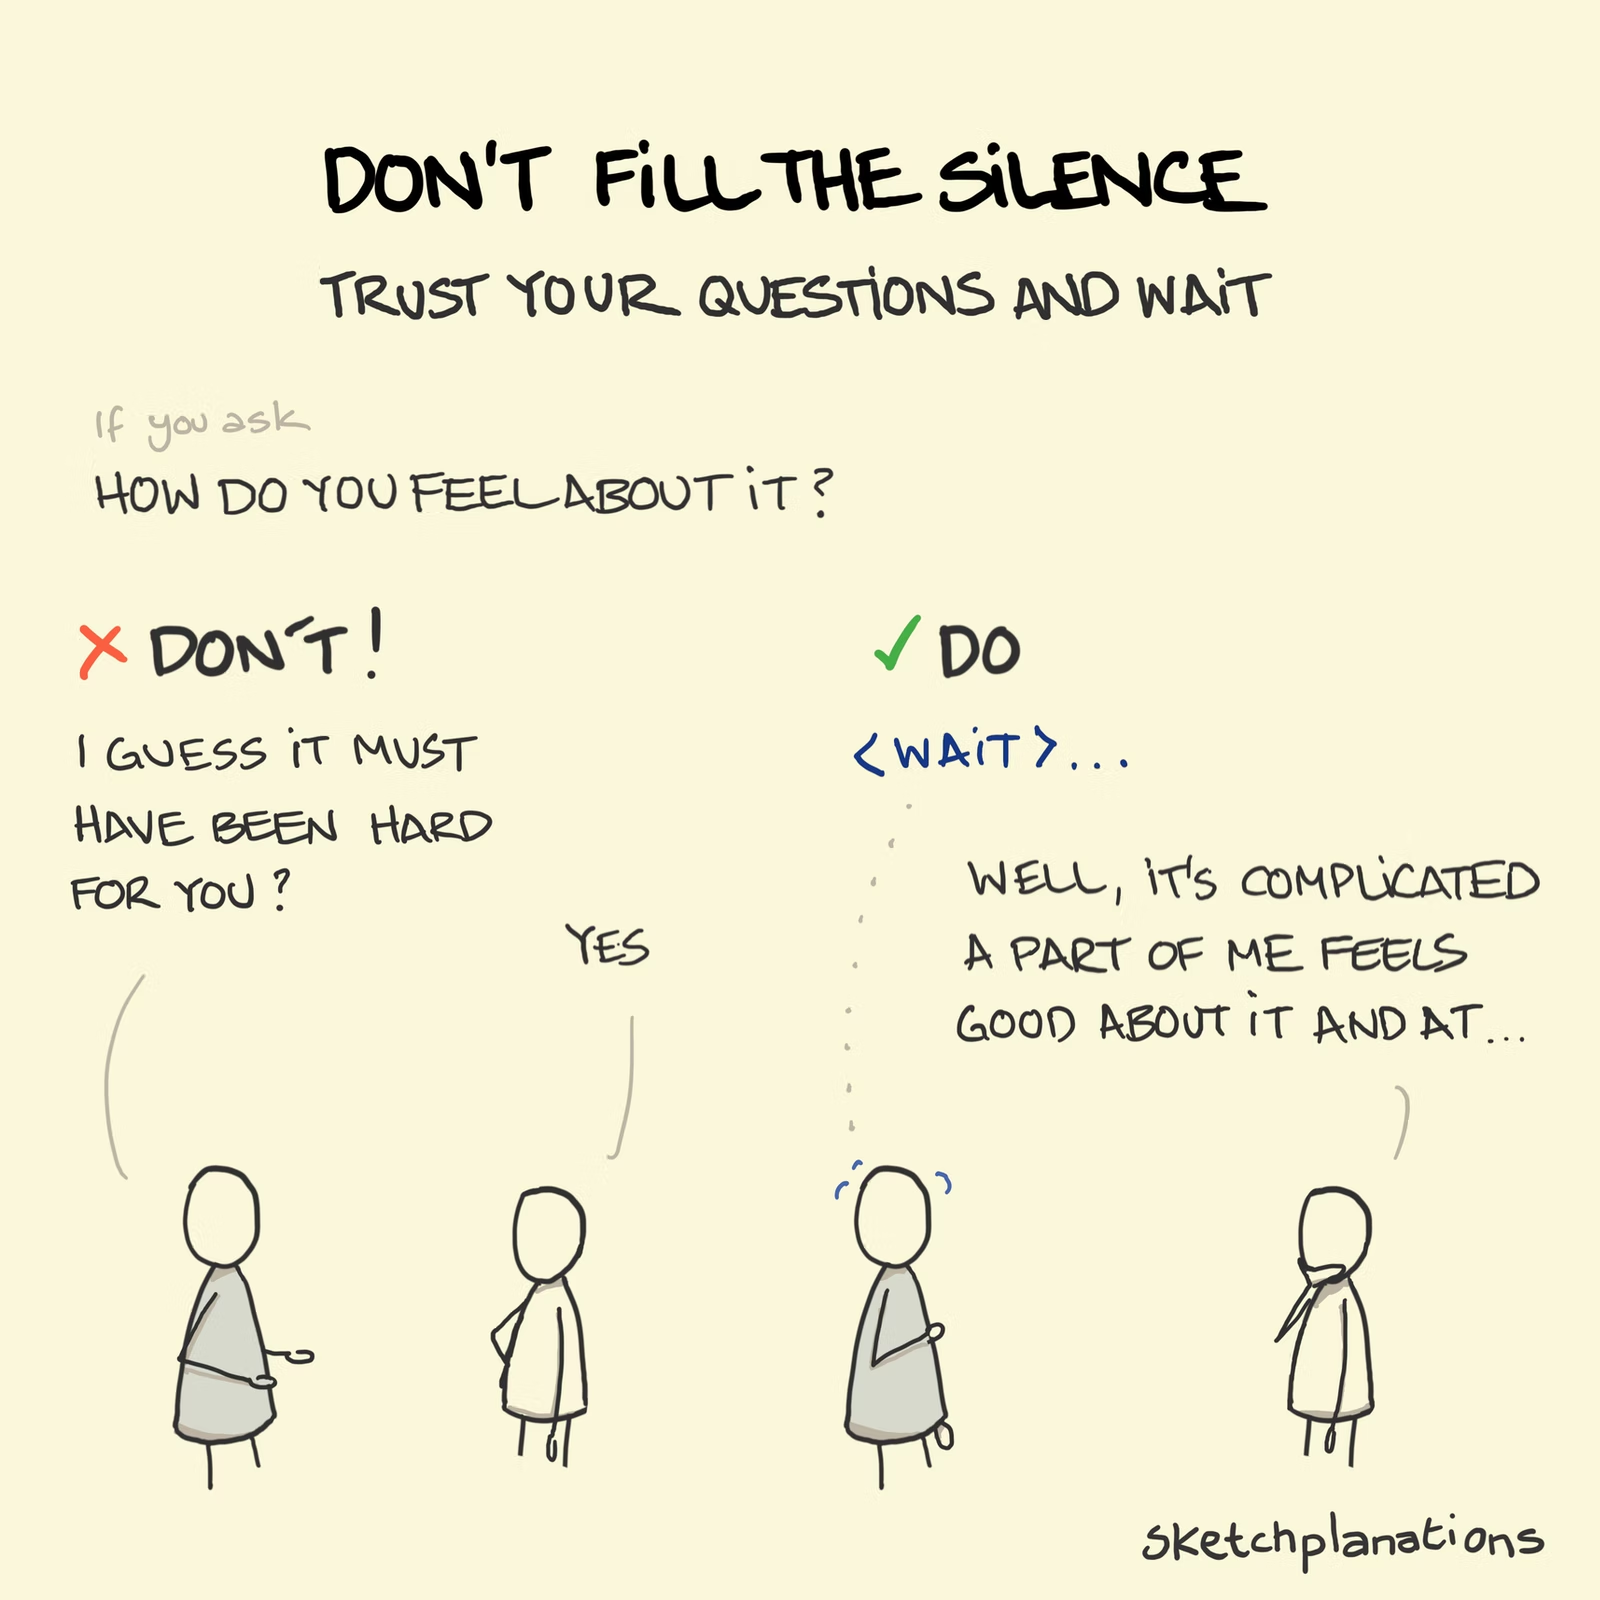 Sketchplanations cartoon with “don’t” and “do” scenarios. Don’t: an interviewer interjects to suggest an answer, and the interviewee simply agrees. Do: an interviewer waits for a beat, and the interviewee provides a more detailed answer.